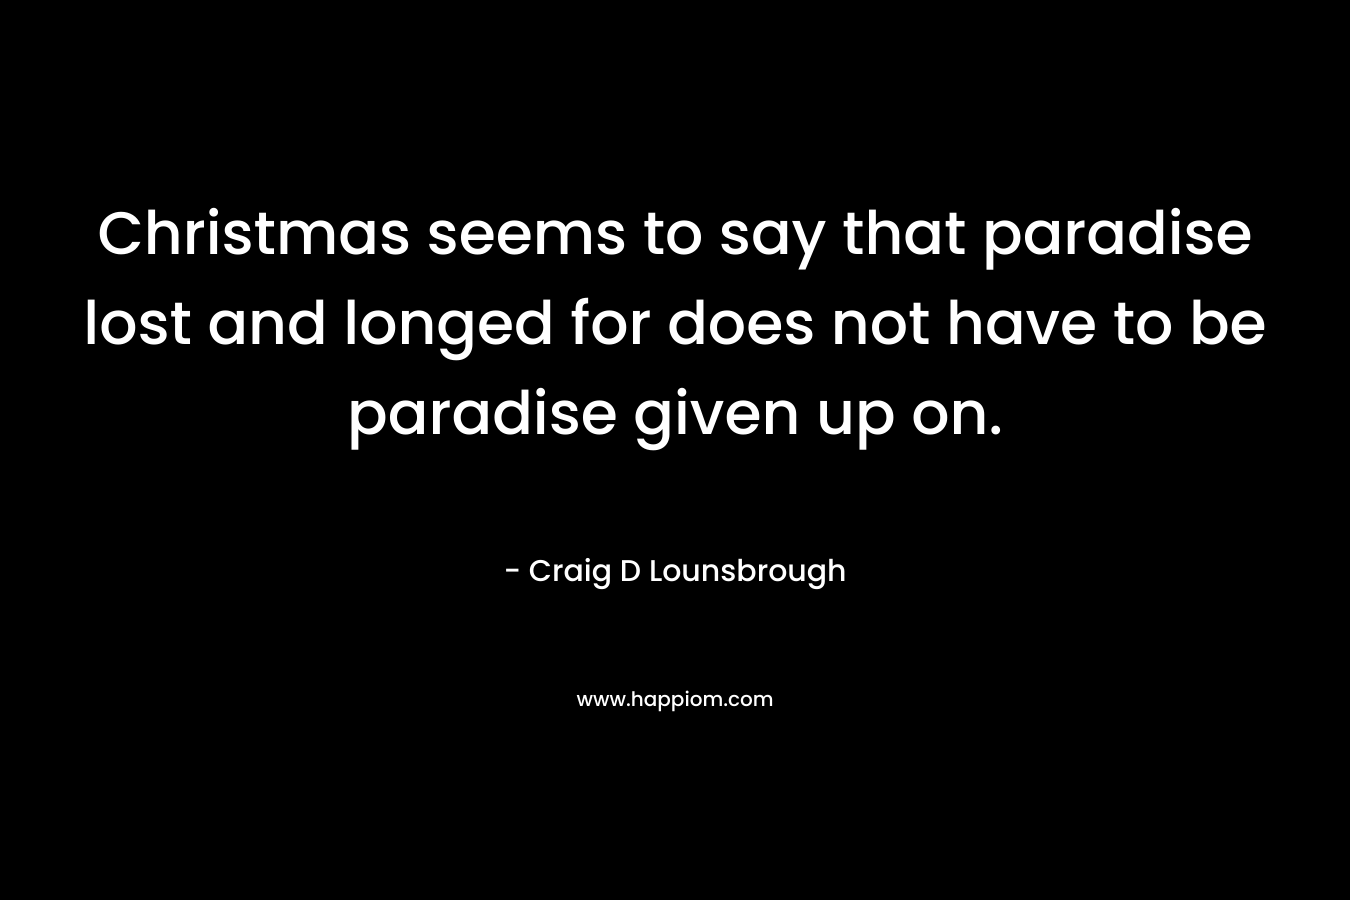 Christmas seems to say that paradise lost and longed for does not have to be paradise given up on. – Craig D Lounsbrough